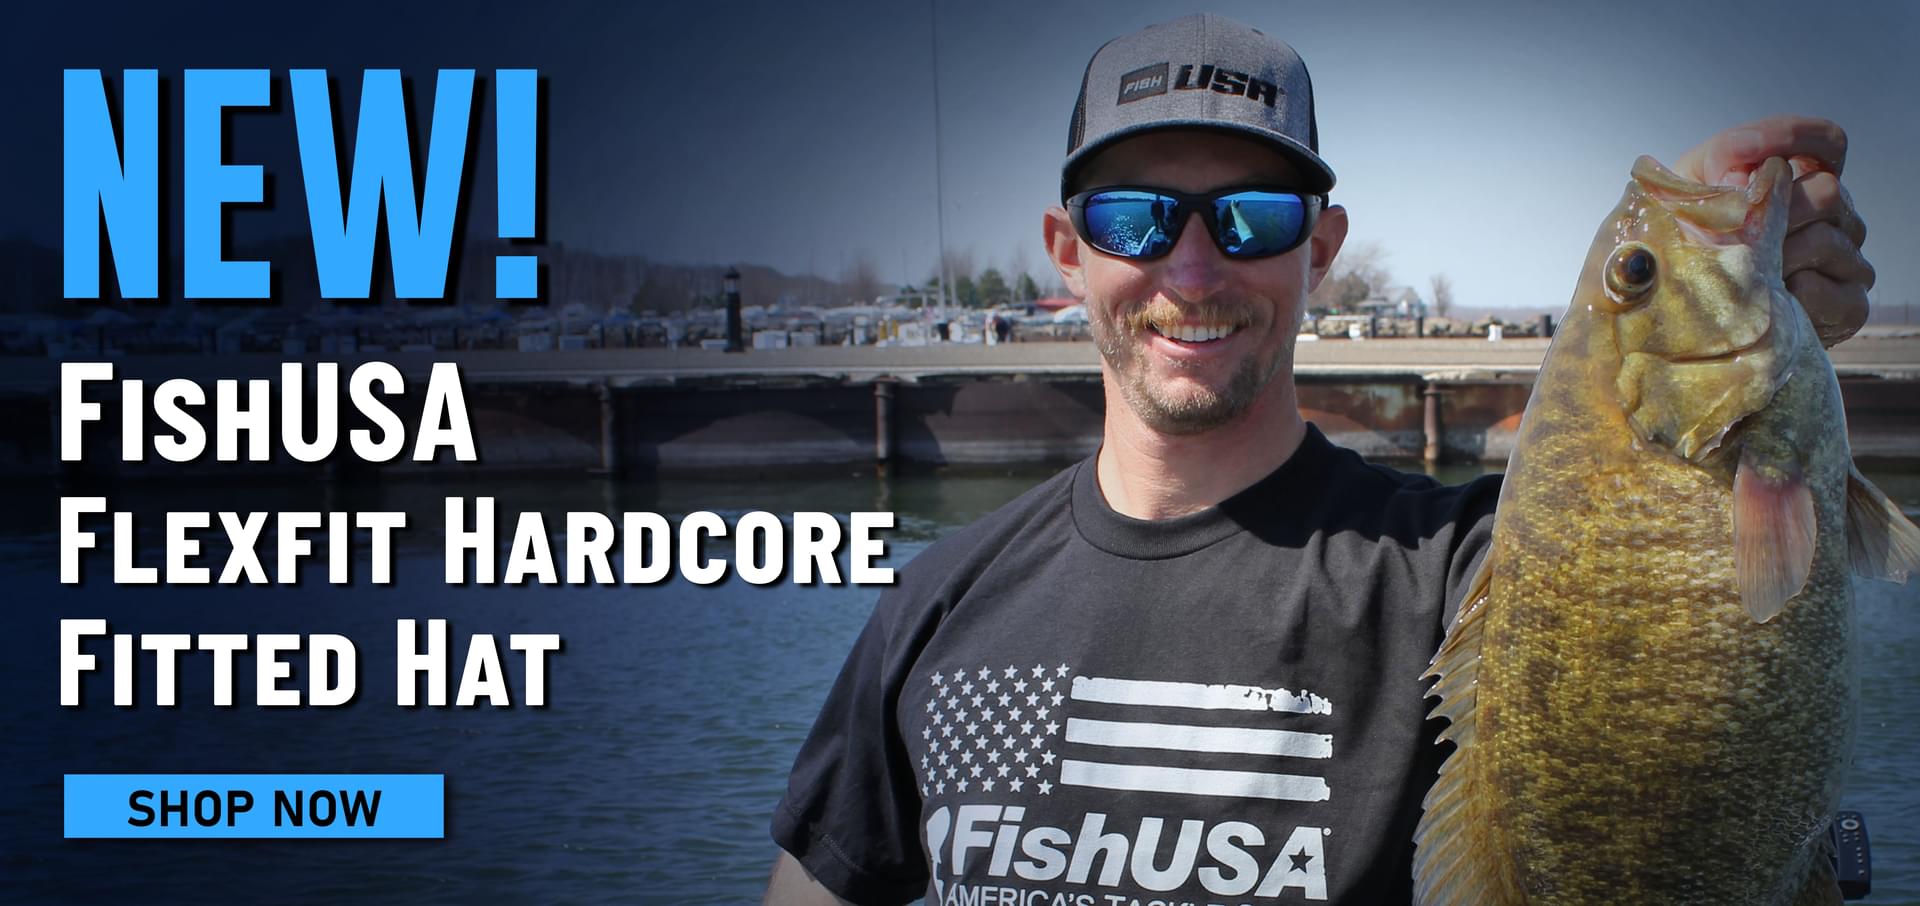 Early Memorial Day Deals! Gear Up for Your Long Weekend NOW! - Fish USA